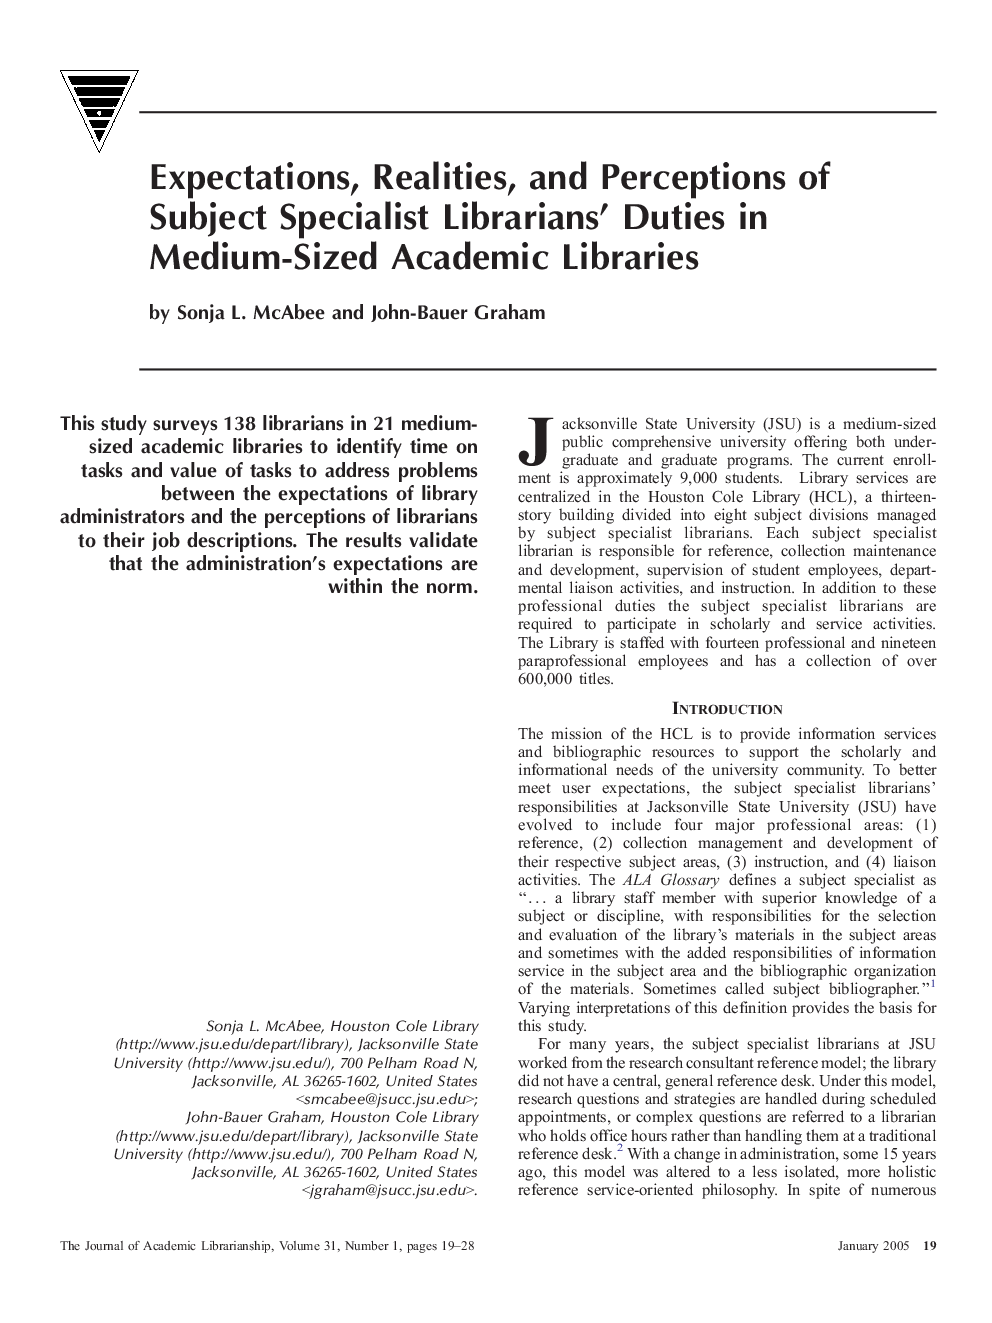 Expectations, Realities, and Perceptions of Subject Specialist Librarians' Duties in Medium-Sized Academic Libraries